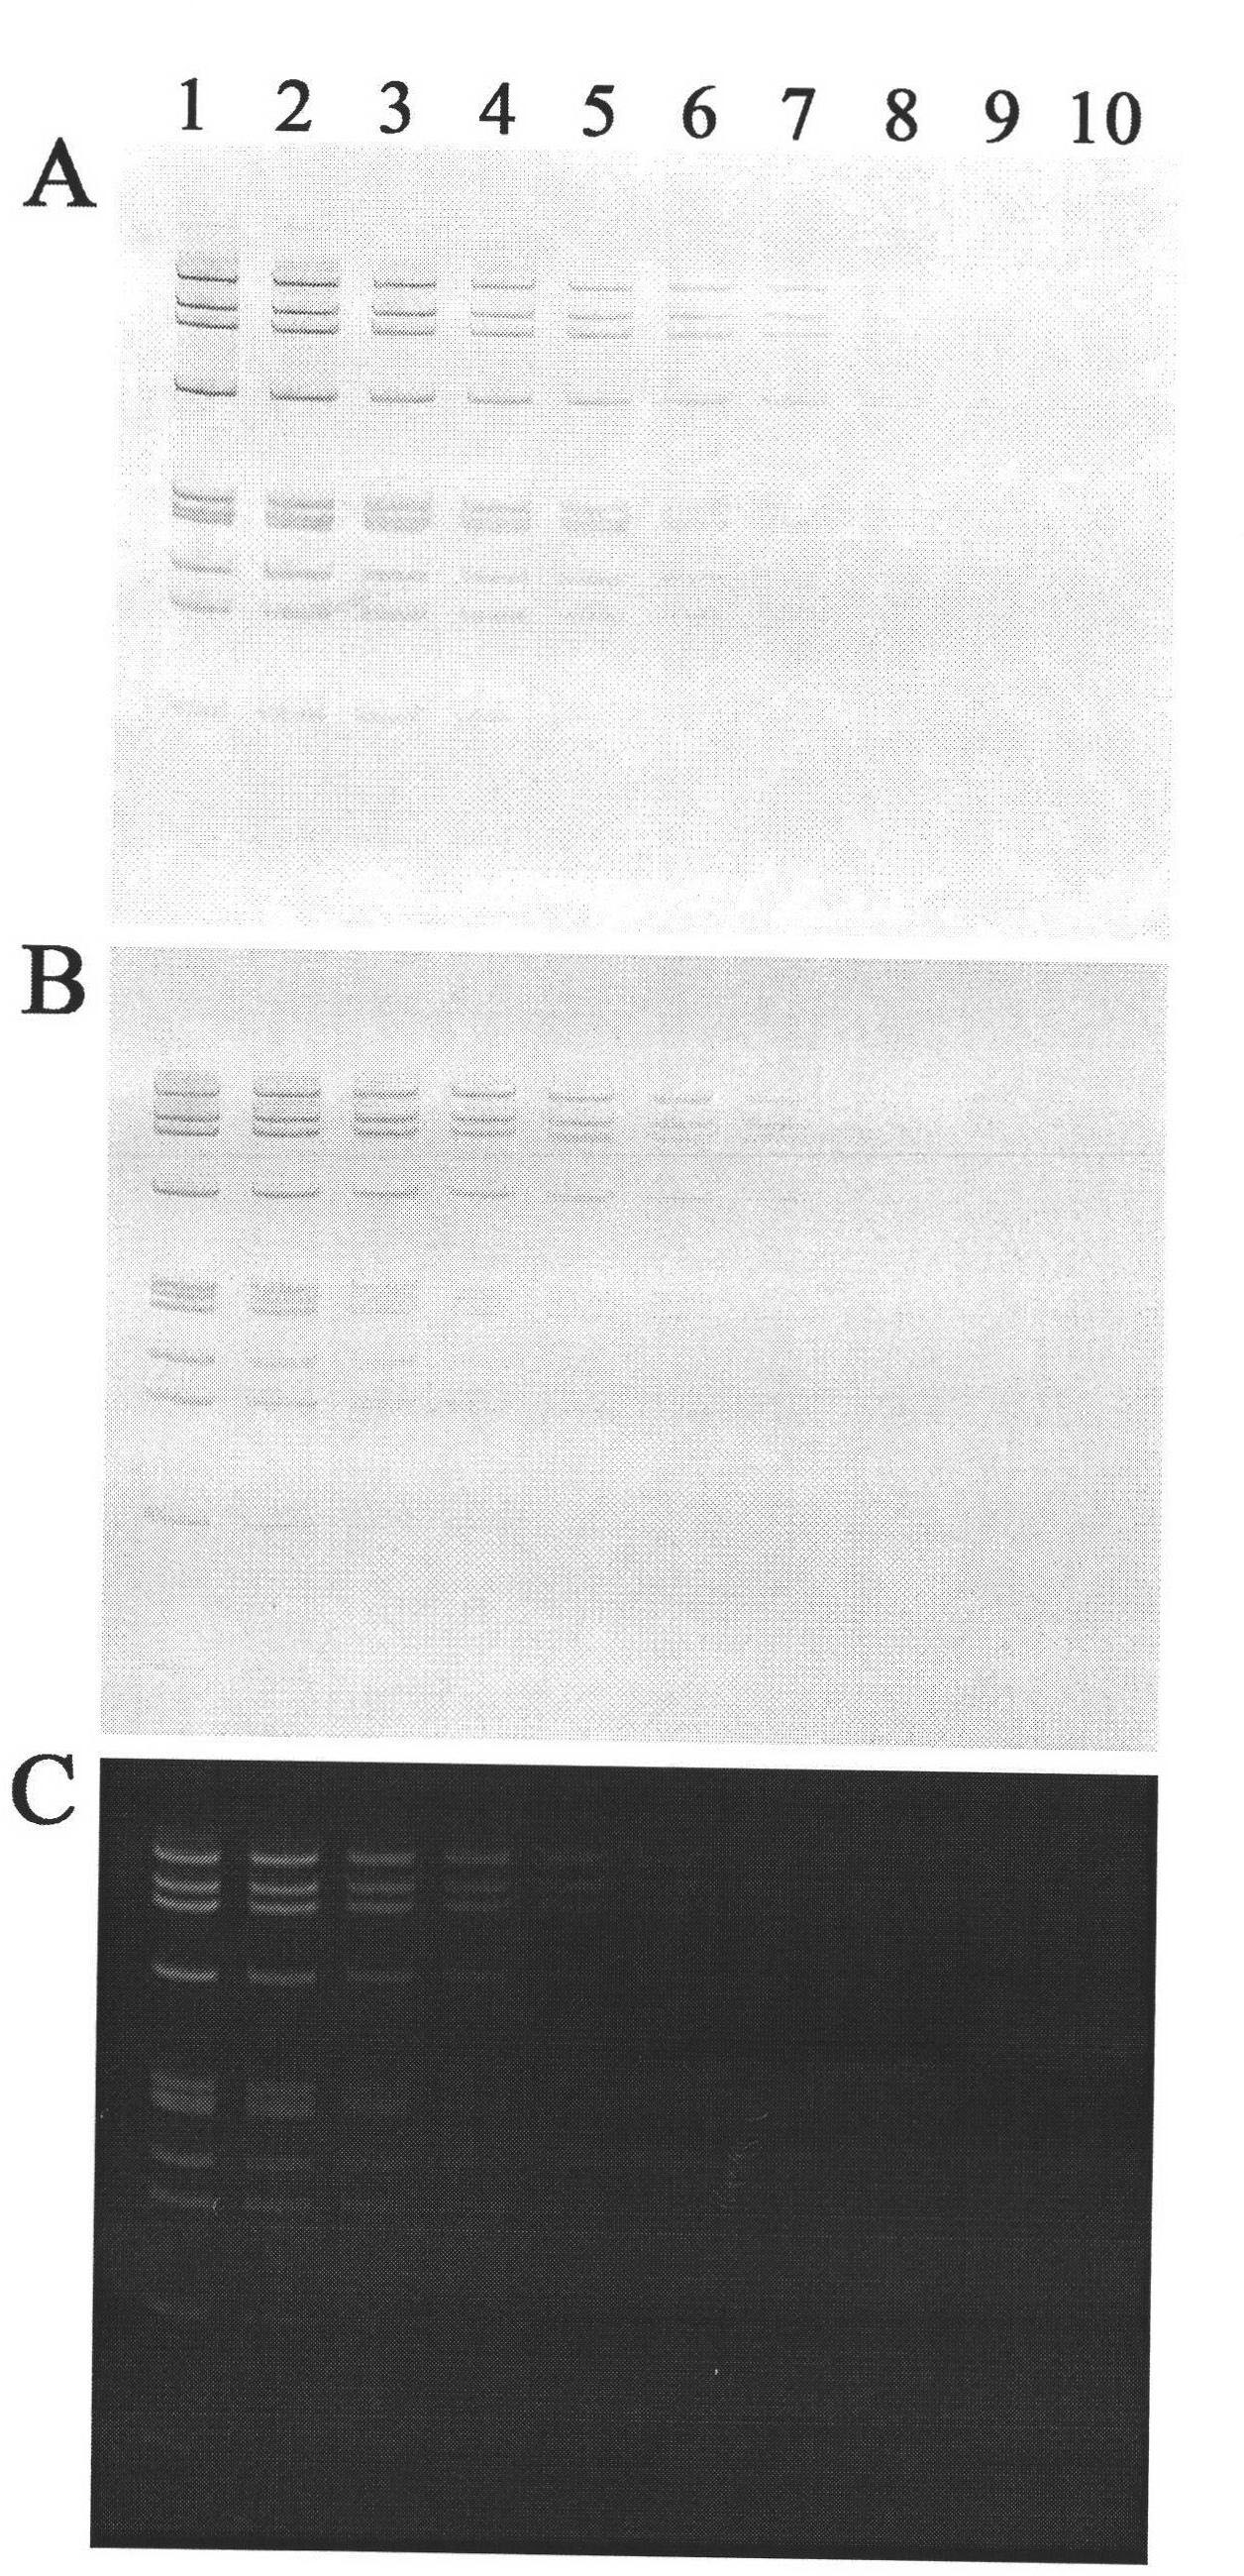 Safe and environment-friendly DNA (Deoxyribose Nucleic Acid) silver staining method for polyacrylamide gel